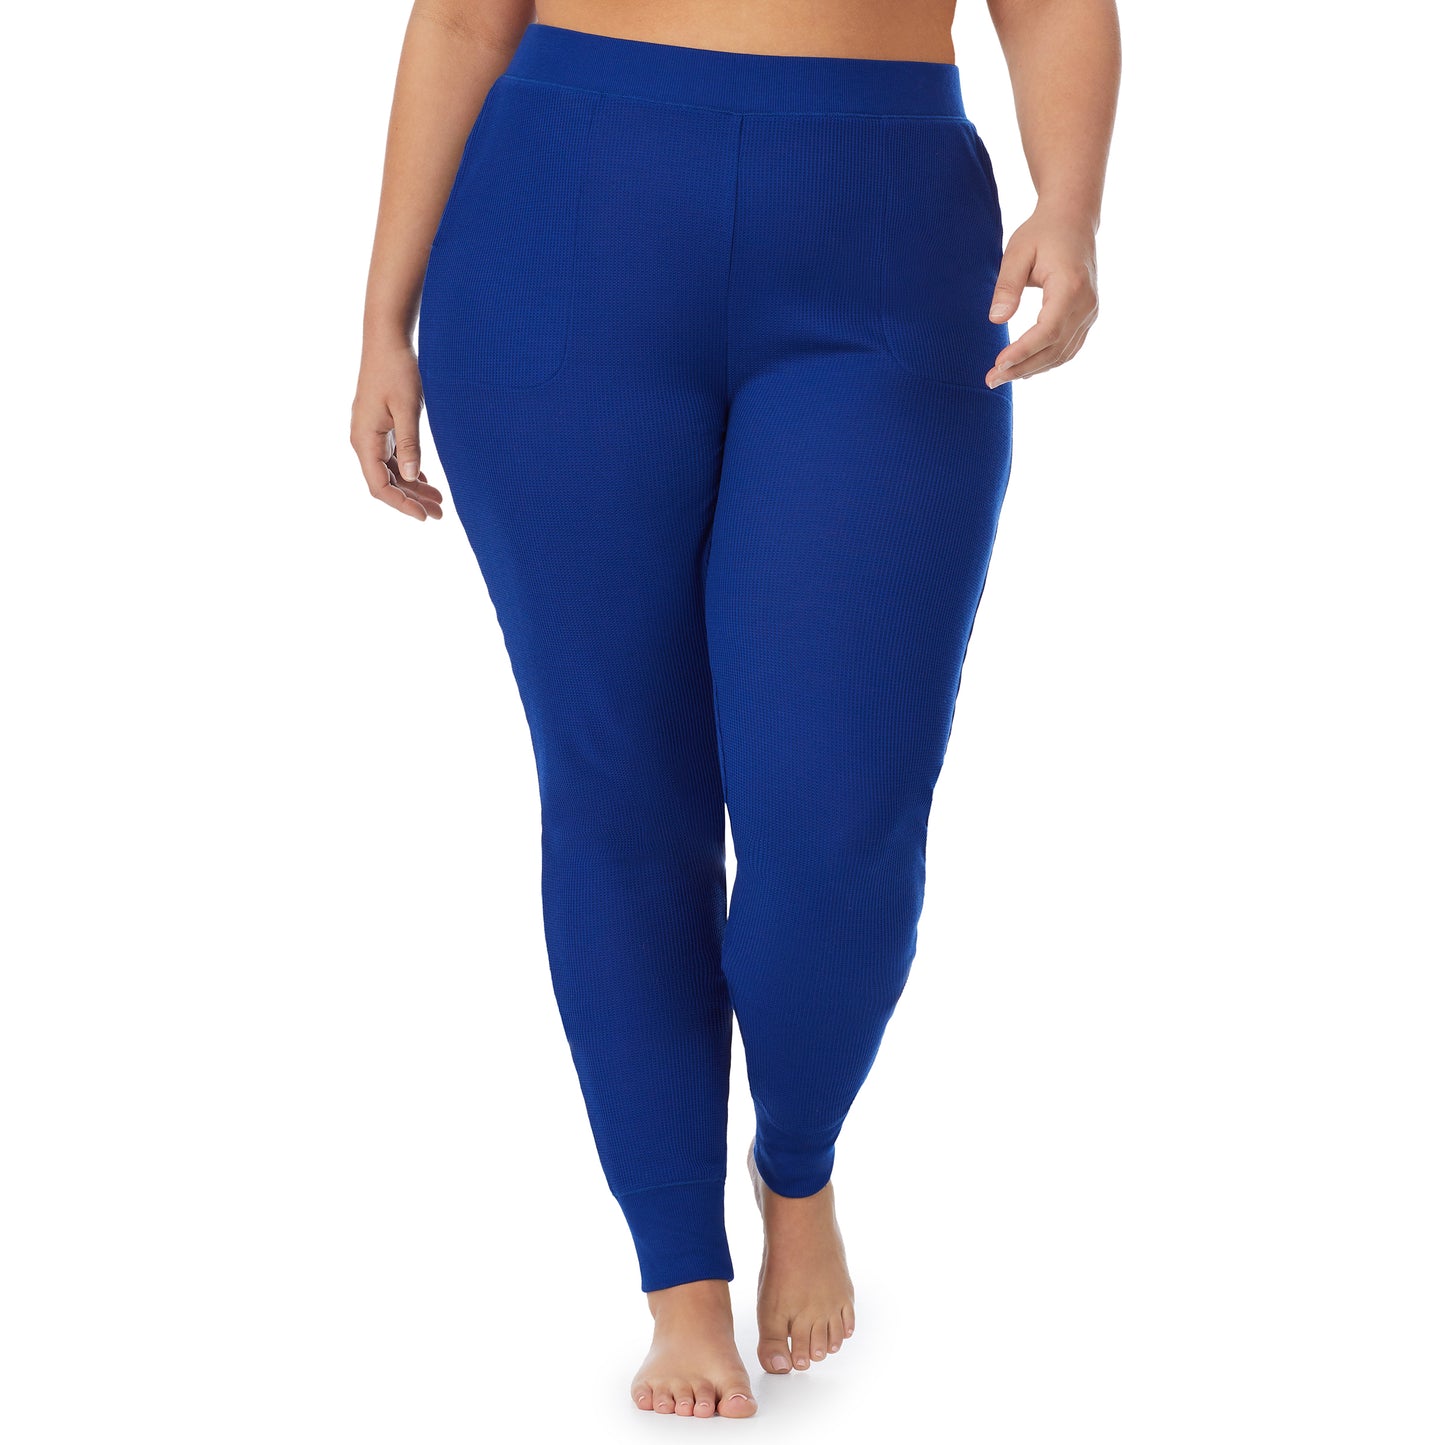 Royal Blue; Model is wearing size 1X. She is 5'9", Bust 38", Waist 36", Hips 48.5".@A lady wearing a royal blue legging plus.